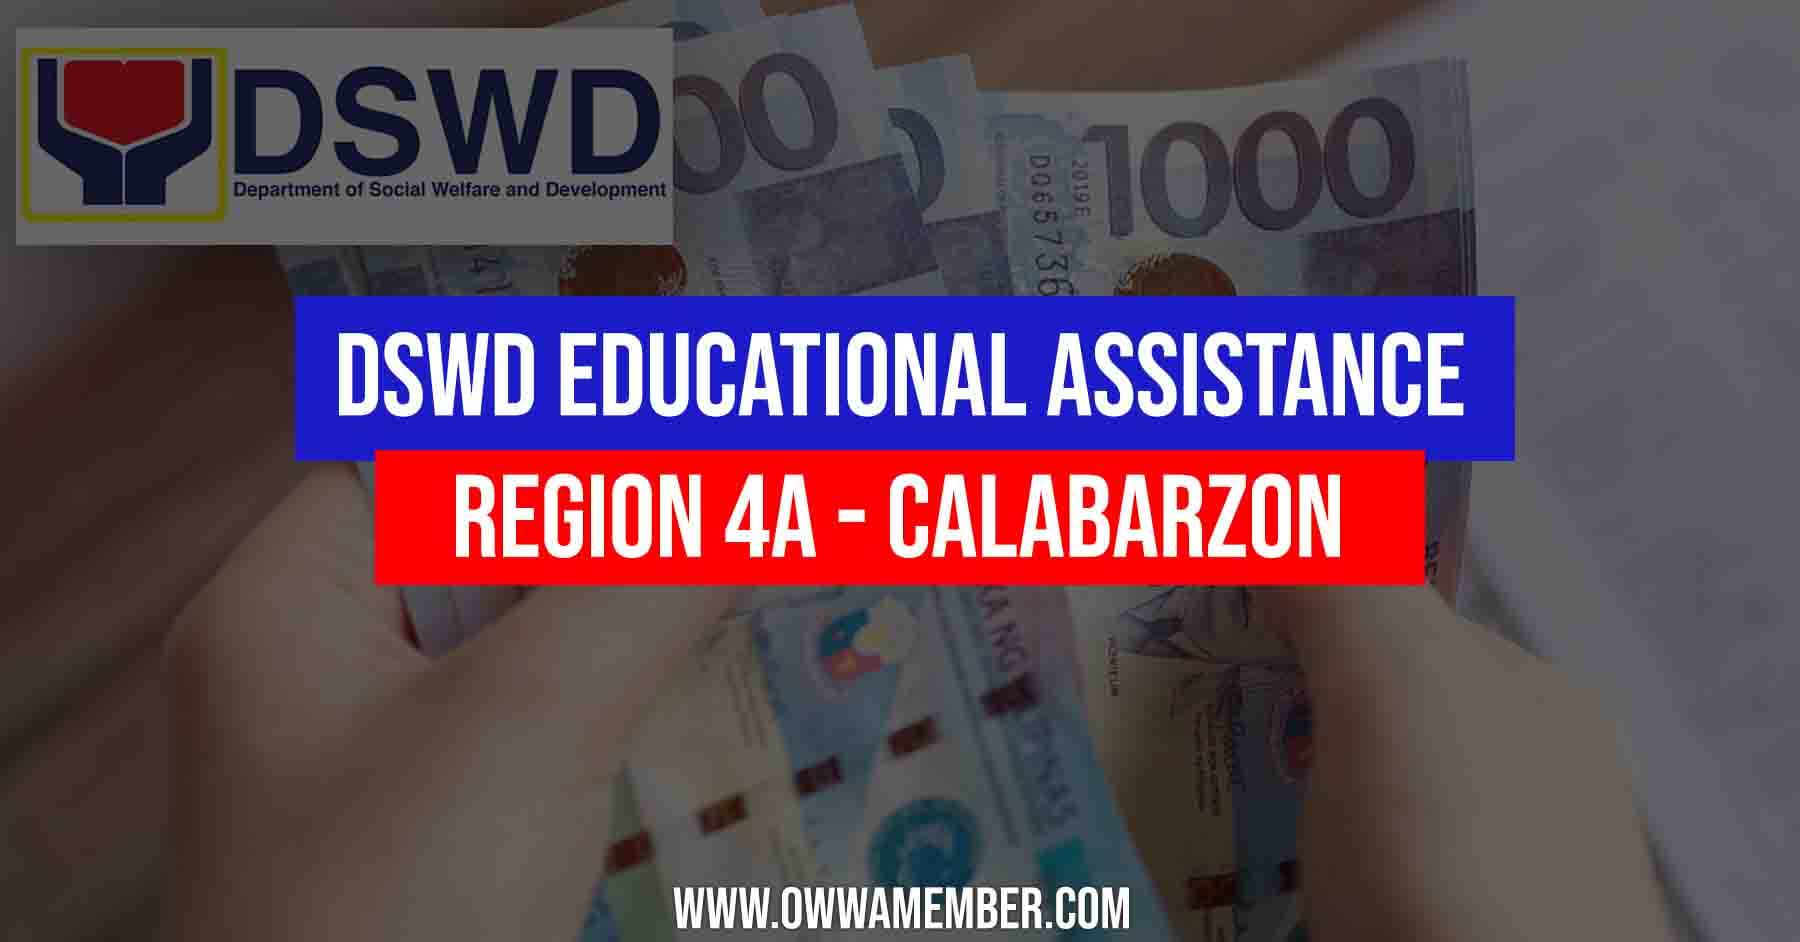 dswd region 4a educational cash assistance for students calabarzon region